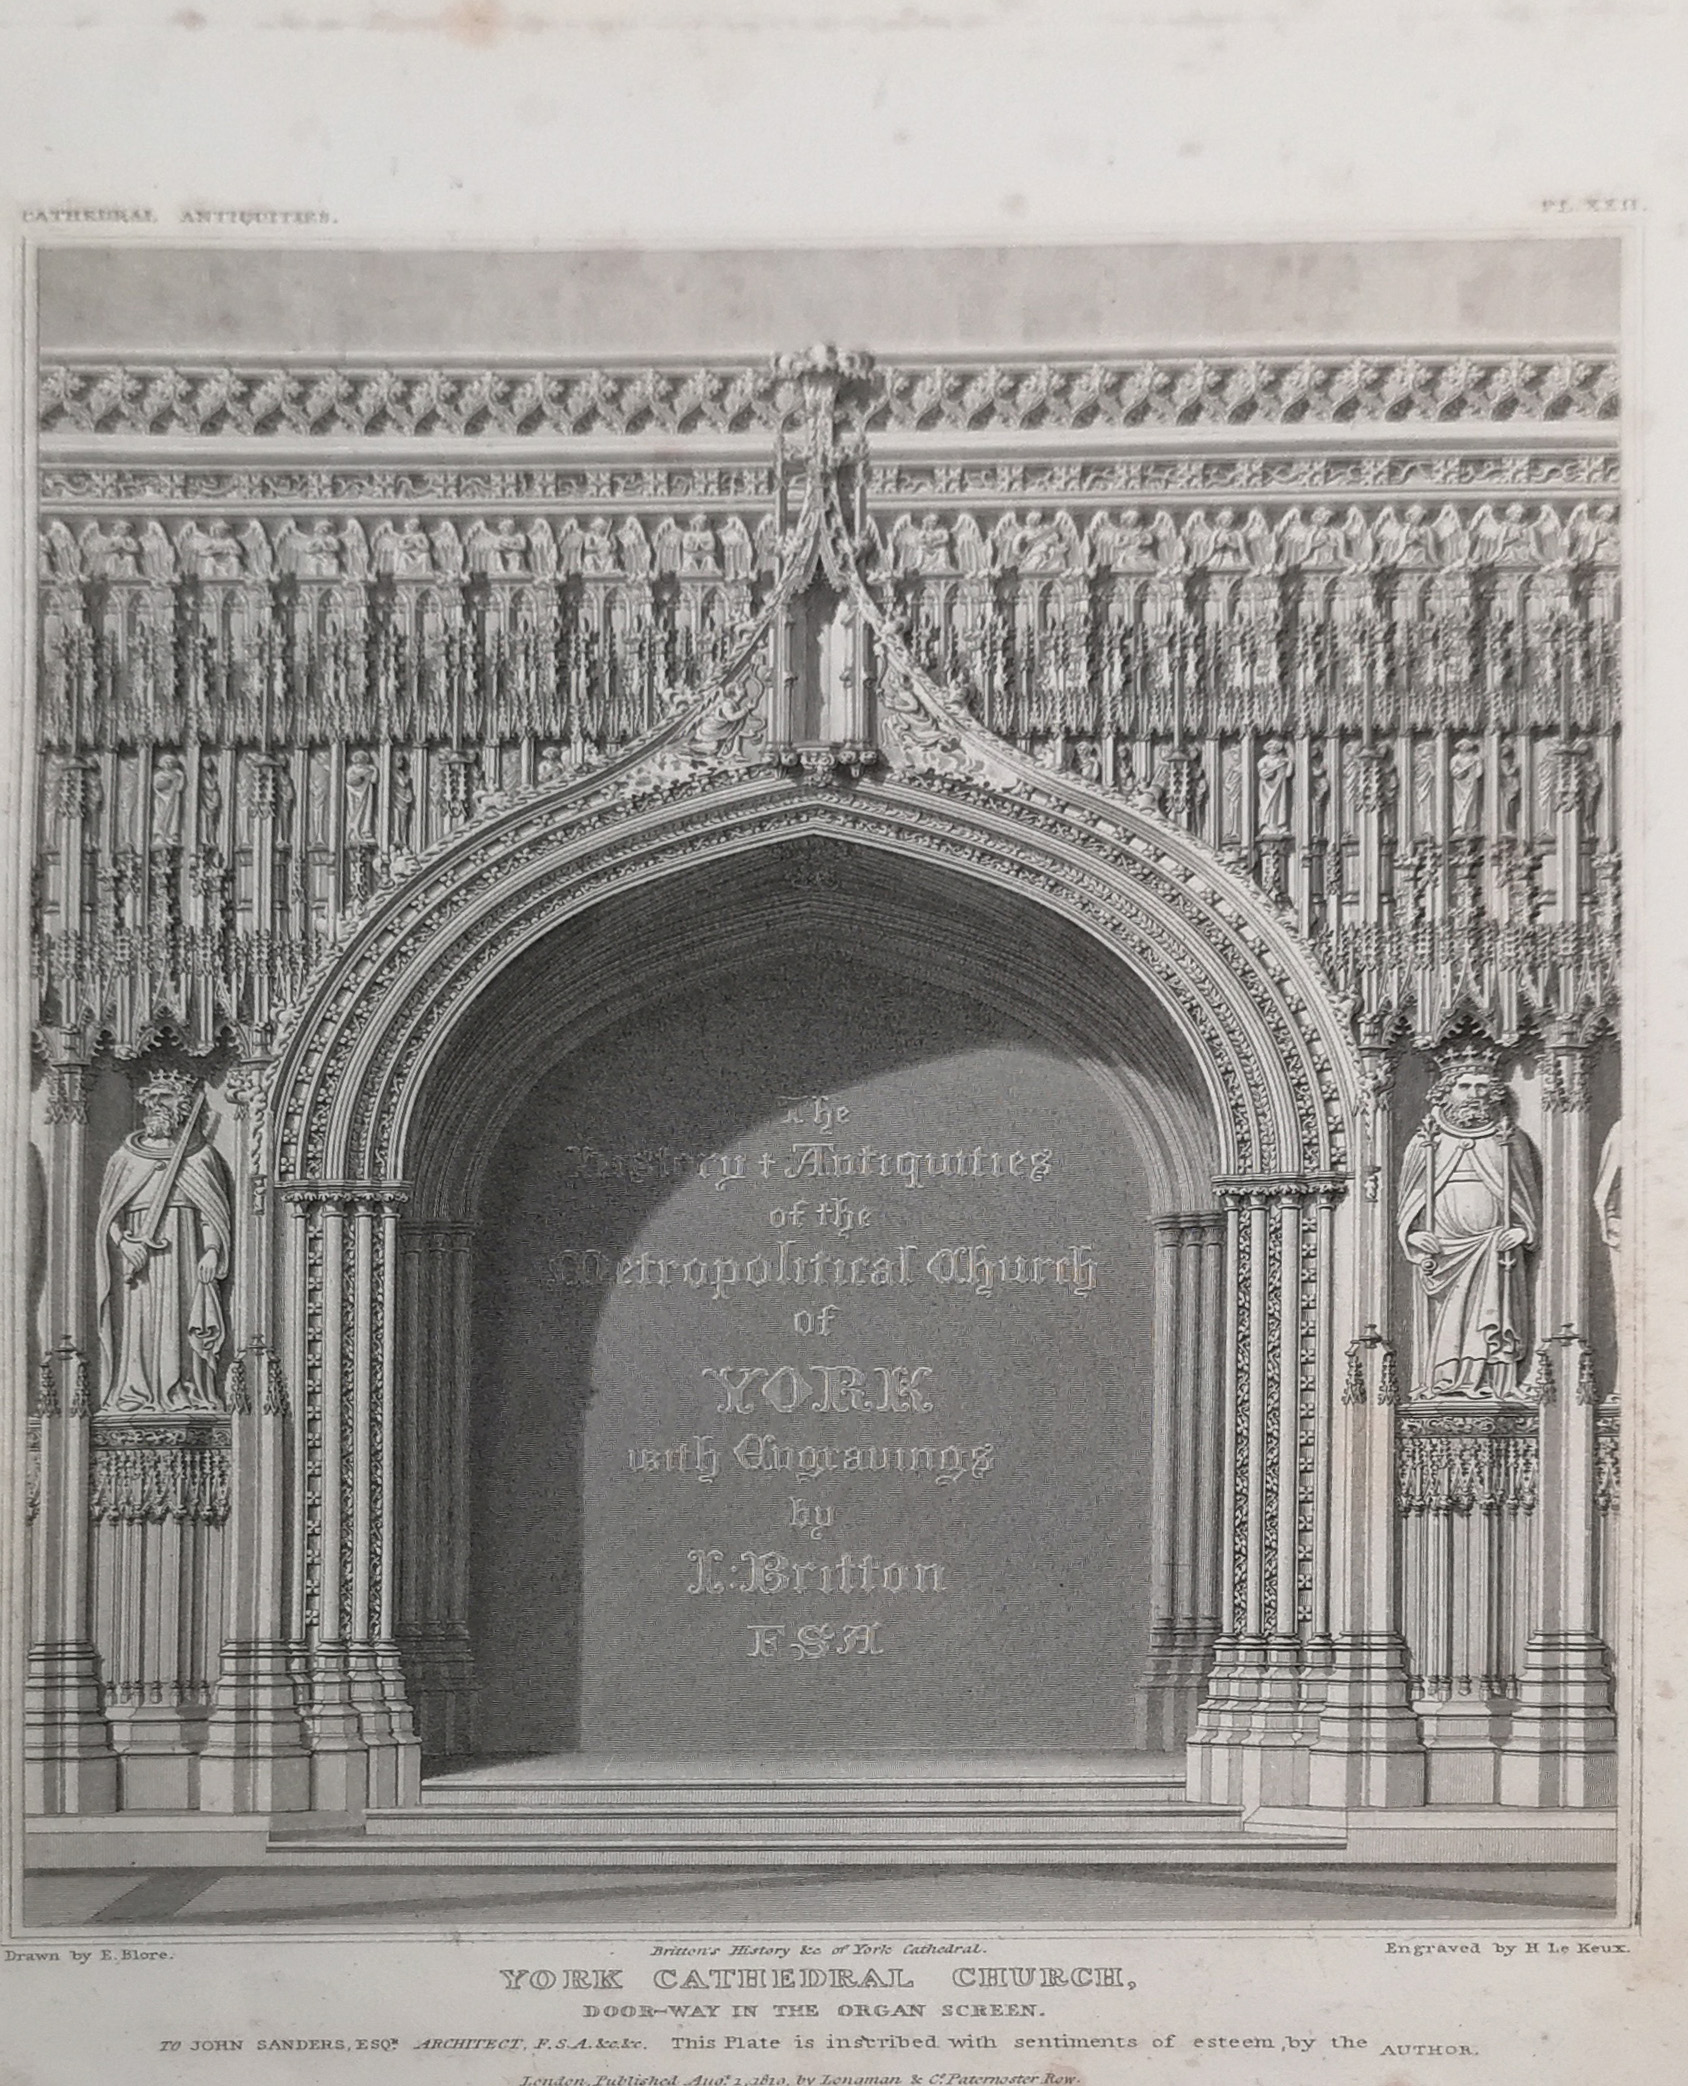 J. BRITTON, 'THE HISTORICAL AND ANTIQUITIES OF METHODICAL CHURCH OF YOUTH', 1819, FOLIO. - Image 2 of 2